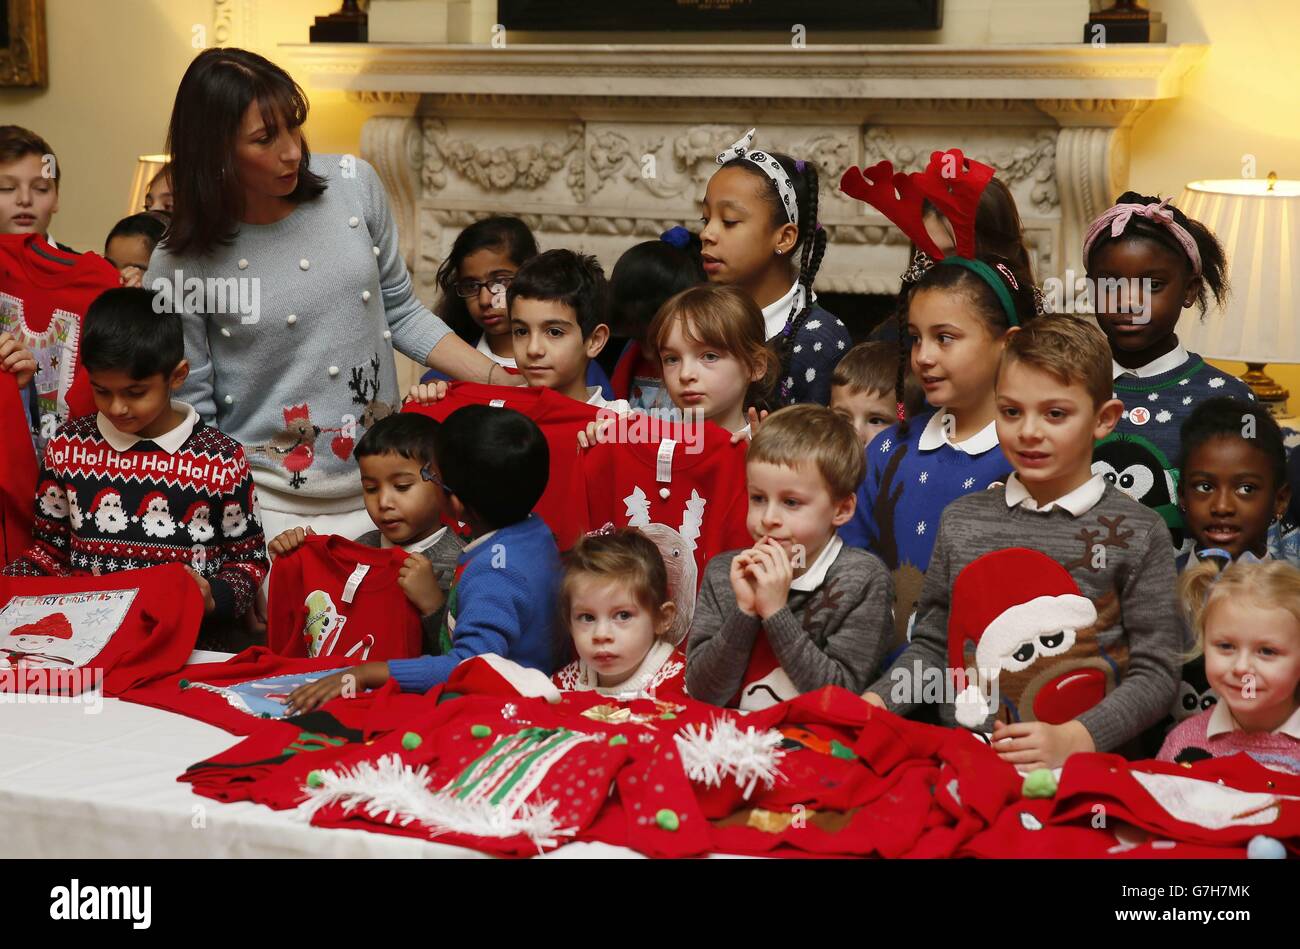 Samantha Cameron, wife of the Prime Minister David Cameron, with children for the Save the Children Christmas Jumper Day inside 10 Downing Street, London. Stock Photo